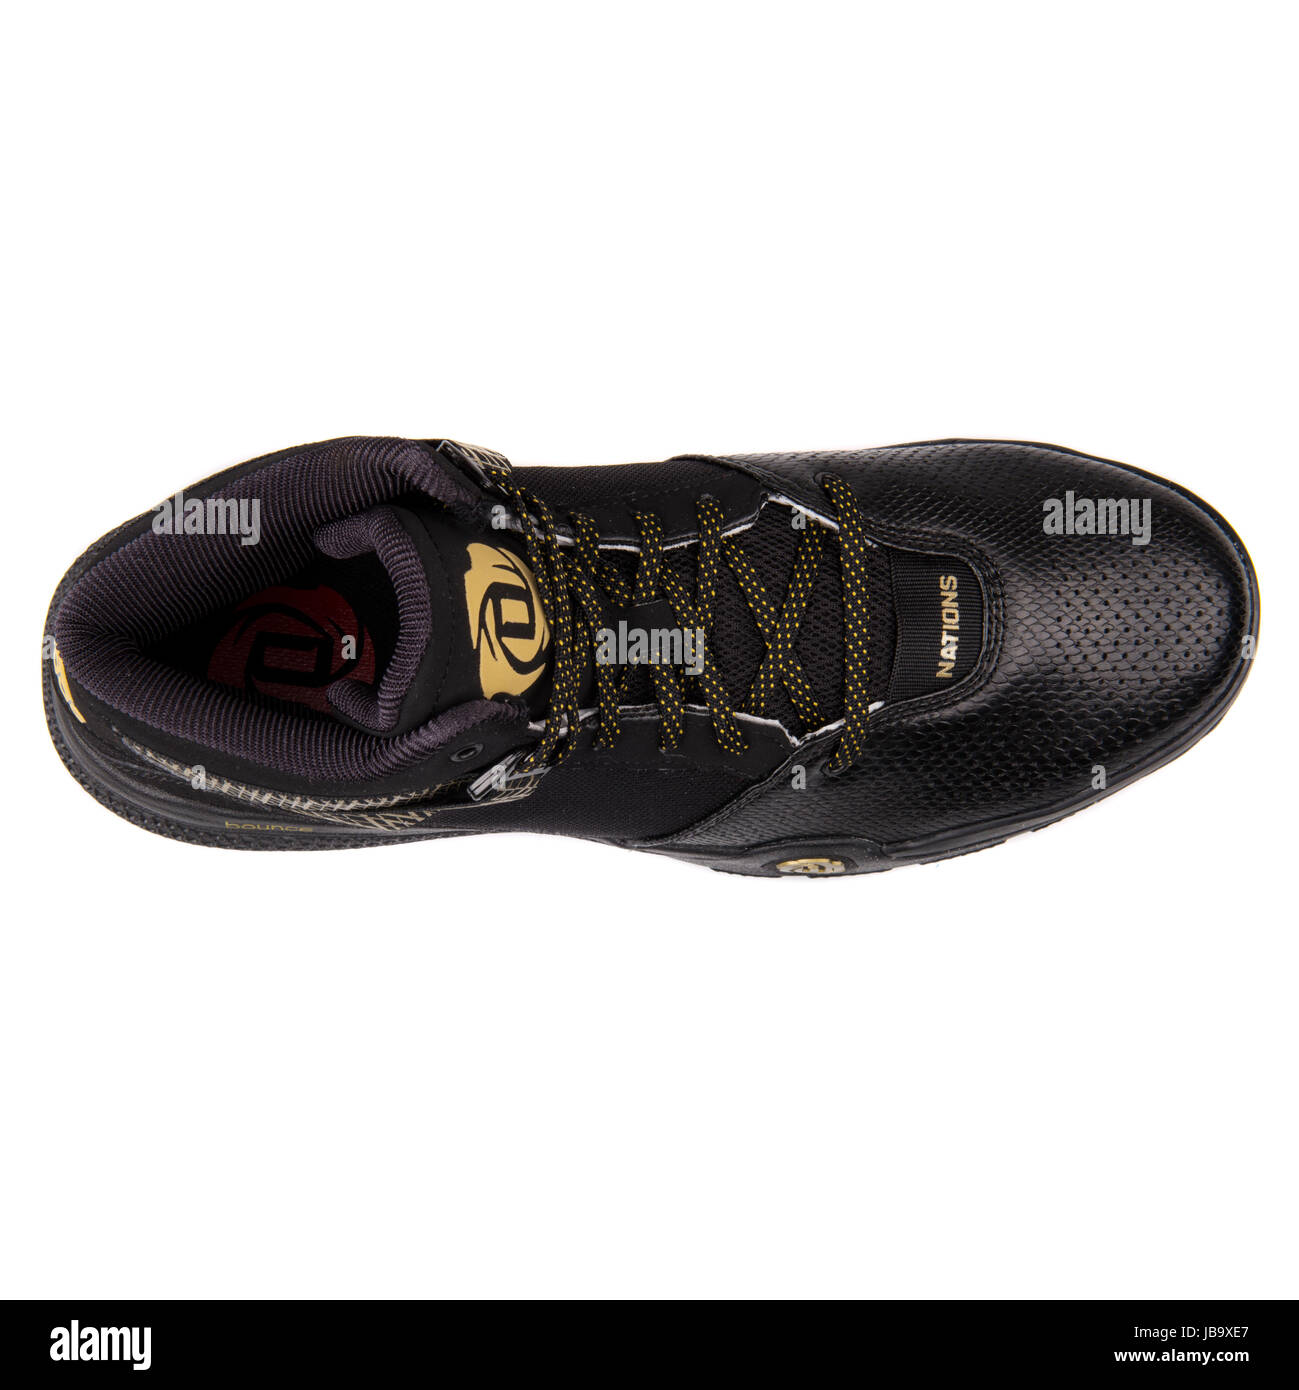 black and gold adidas basketball shoes